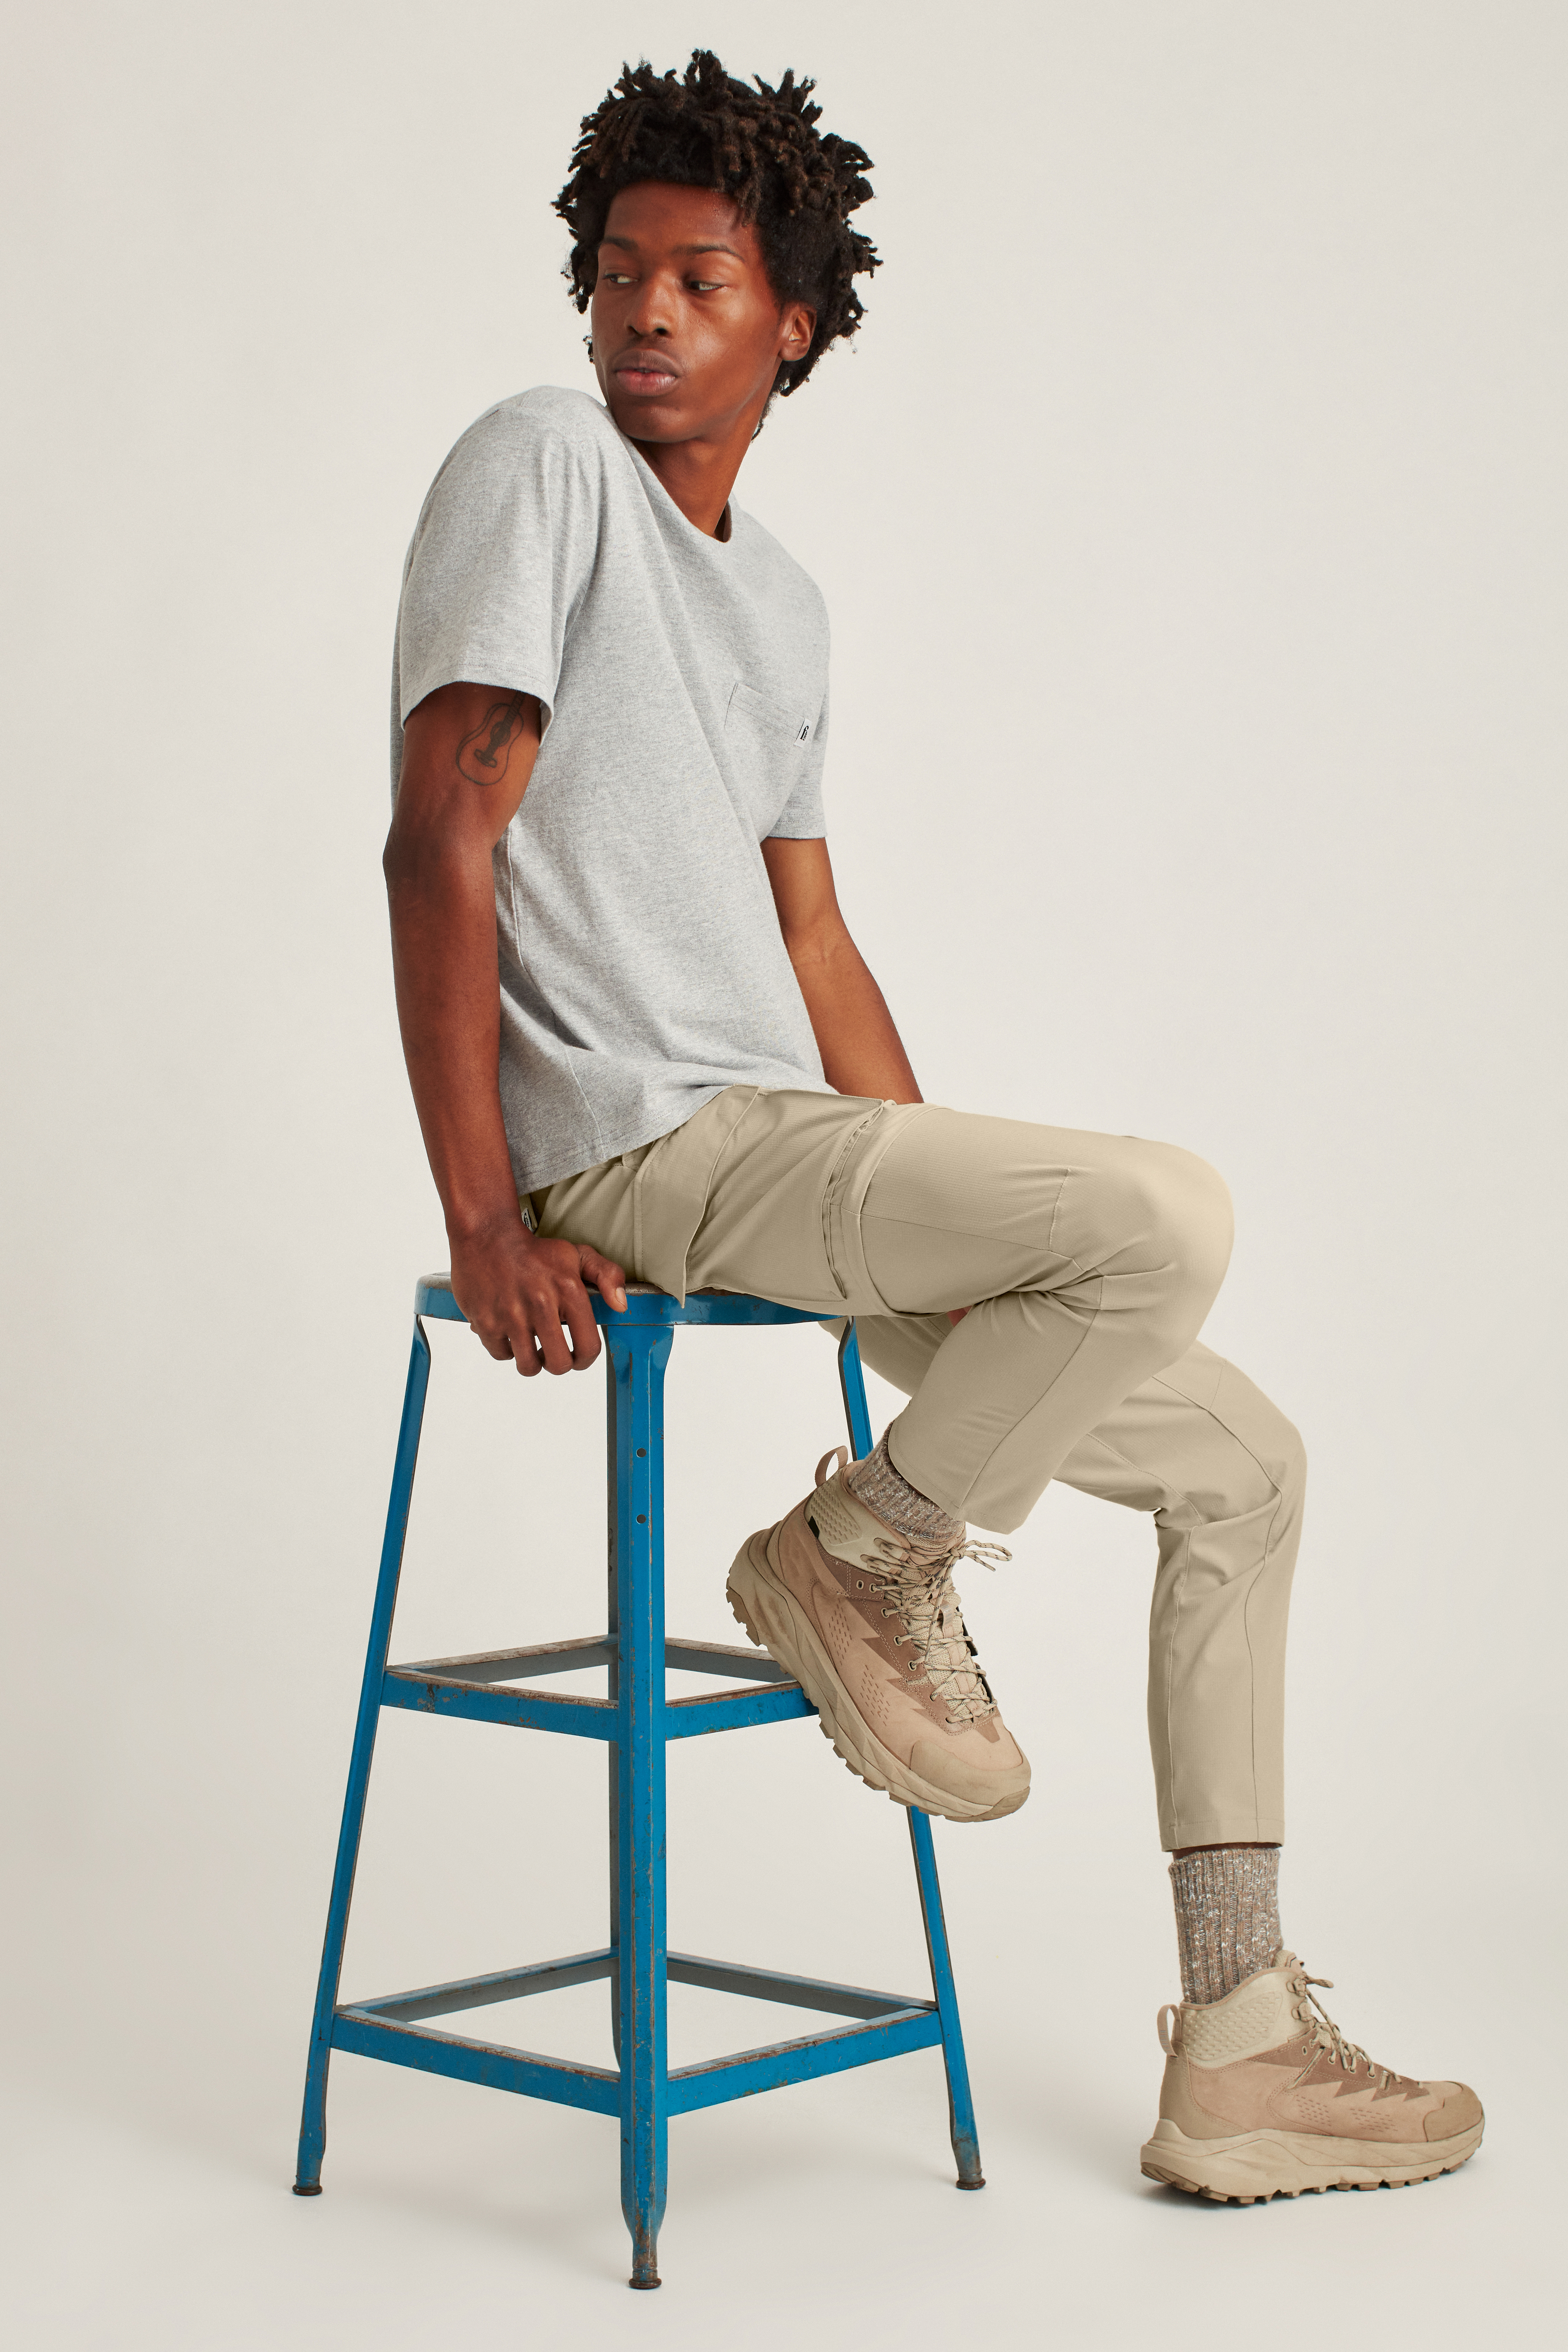 Stretch Convertible Cargo Pant